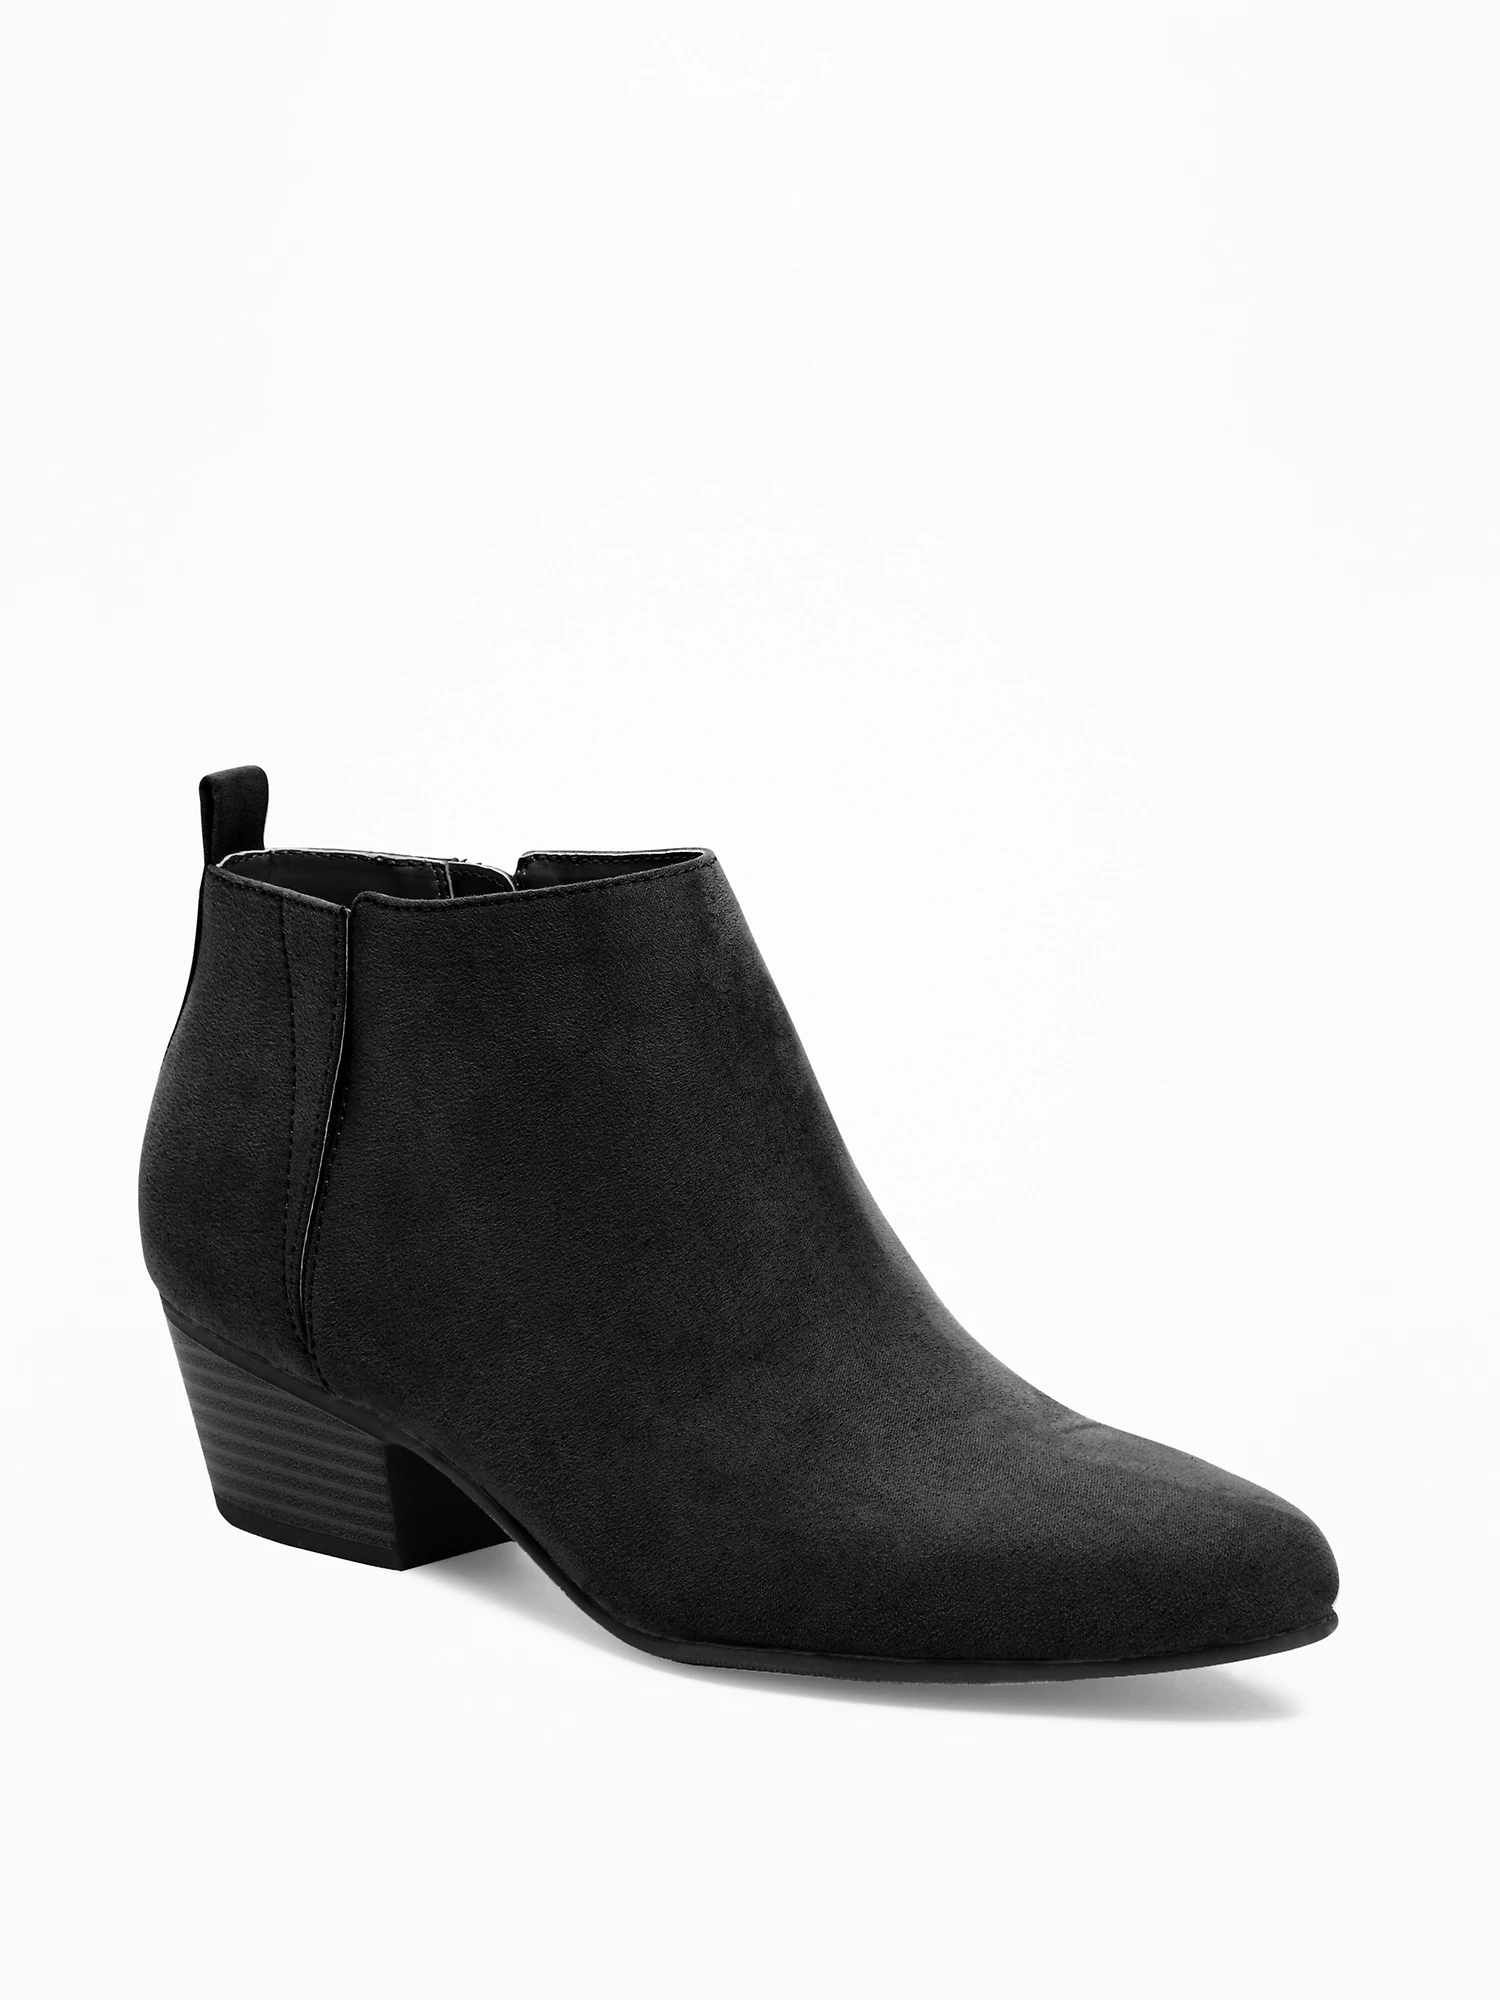 Sueded Ankle Boots for Women - Black